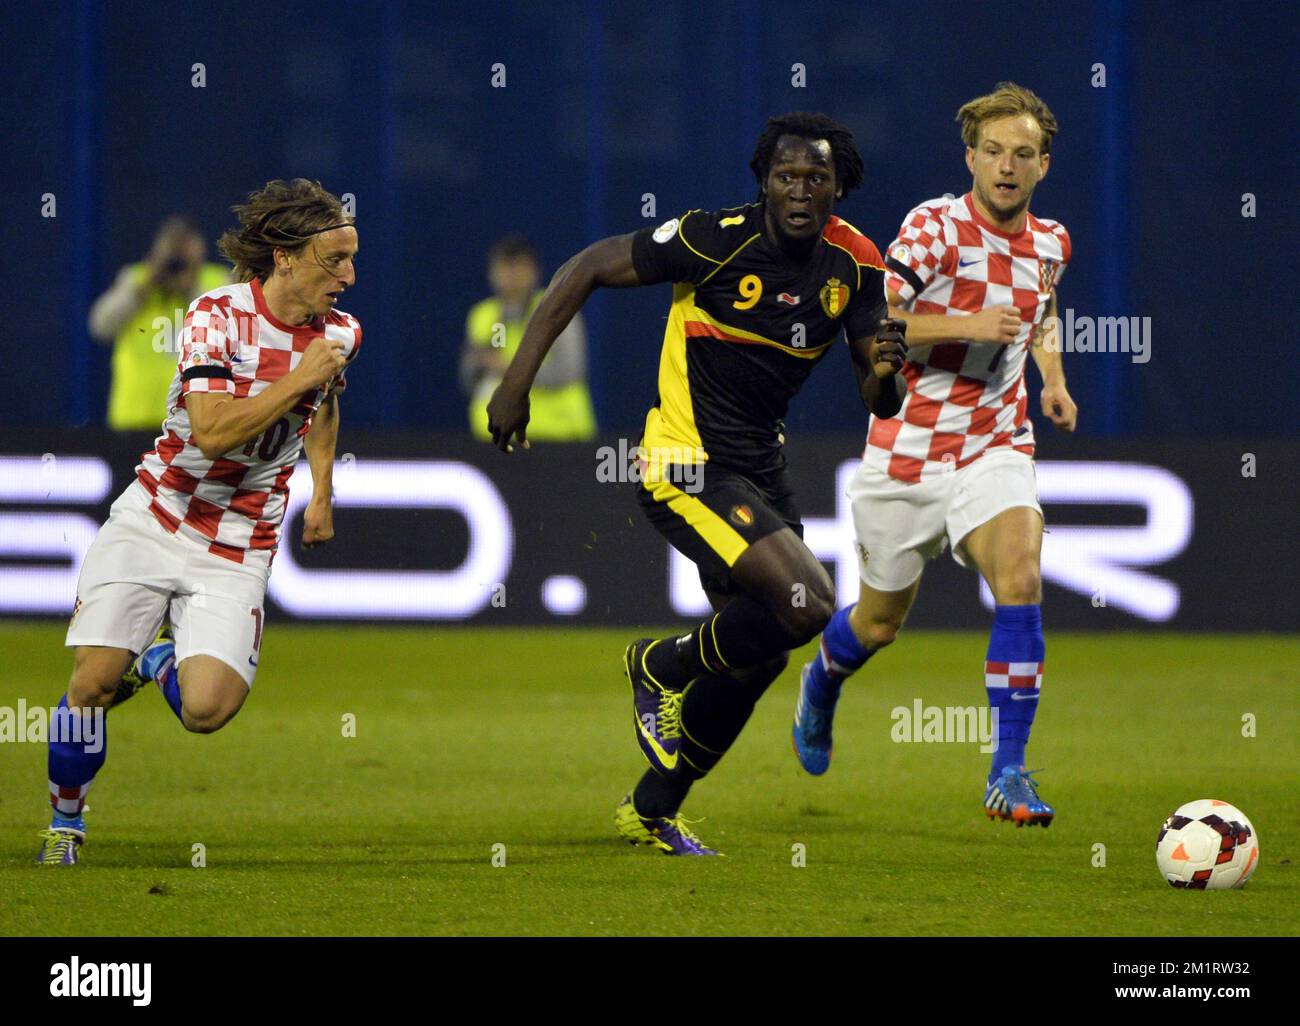 20131011 - ZAGREB, CROATIA: Croatia's Luka Modric and Belgium's Romelu Lukaku fight for the ball during a soccer game between Belgian national team The Red Devils and the Croatian national team in the Maksimir stadium in Zagreb, Croatia, Friday 11 October 2013, a qualification game for the 2014 FIFA World Cup. With two games to play the Red Devils are leading group A, they need one more point to qualify for the World Cup as group winner. BELGA PHOTO ERIC LALMAND Stock Photo